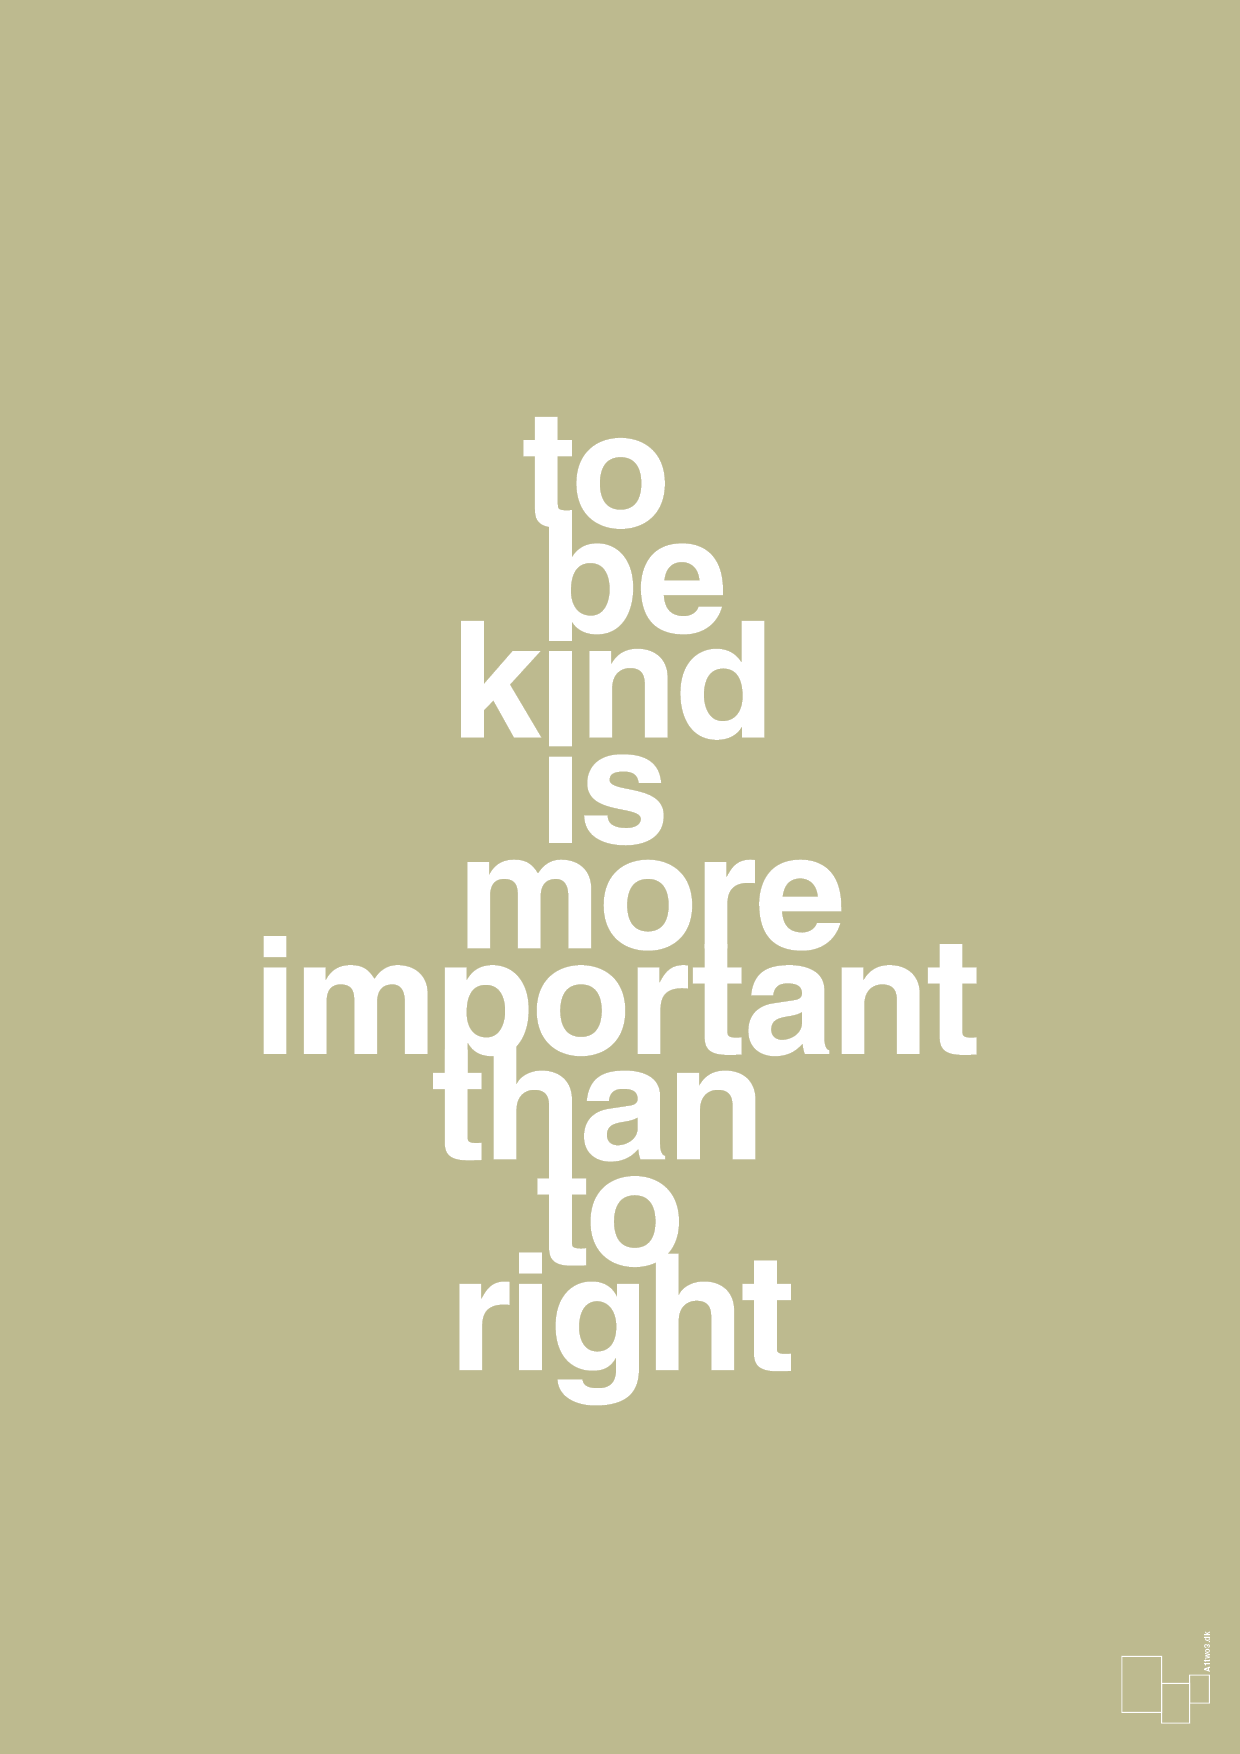 plakat: to be kind is more important than to right